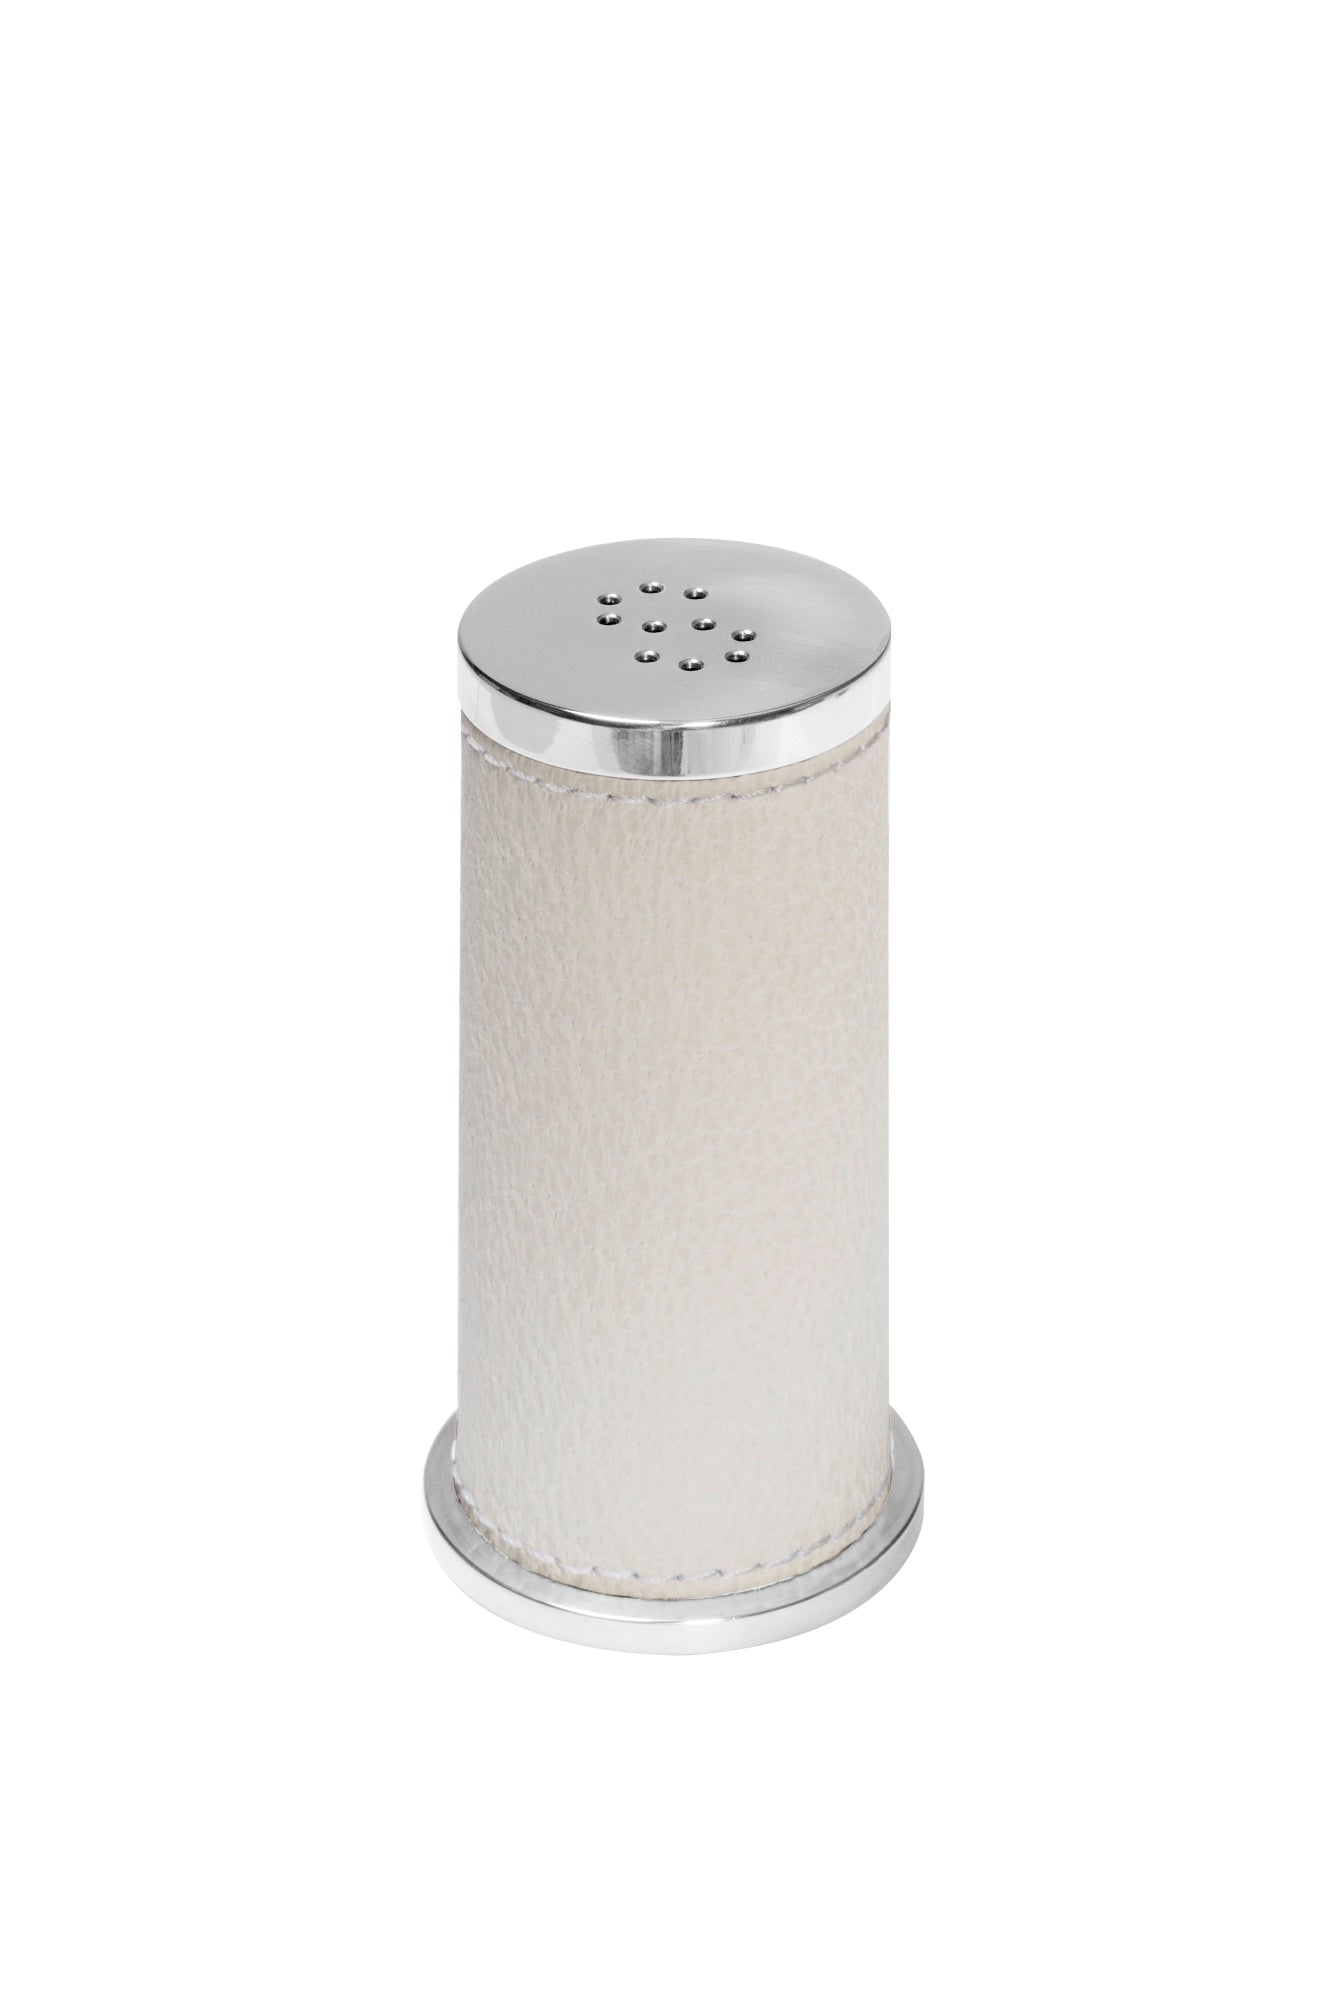 Giobagnara Otello Leather-Covered Stainless Steel Salt Shaker | Luxury Kitchen Accessories, Elegant Salt Shakers & Gift Items | 2Jour Concierge, #1 luxury high-end gift & lifestyle shop